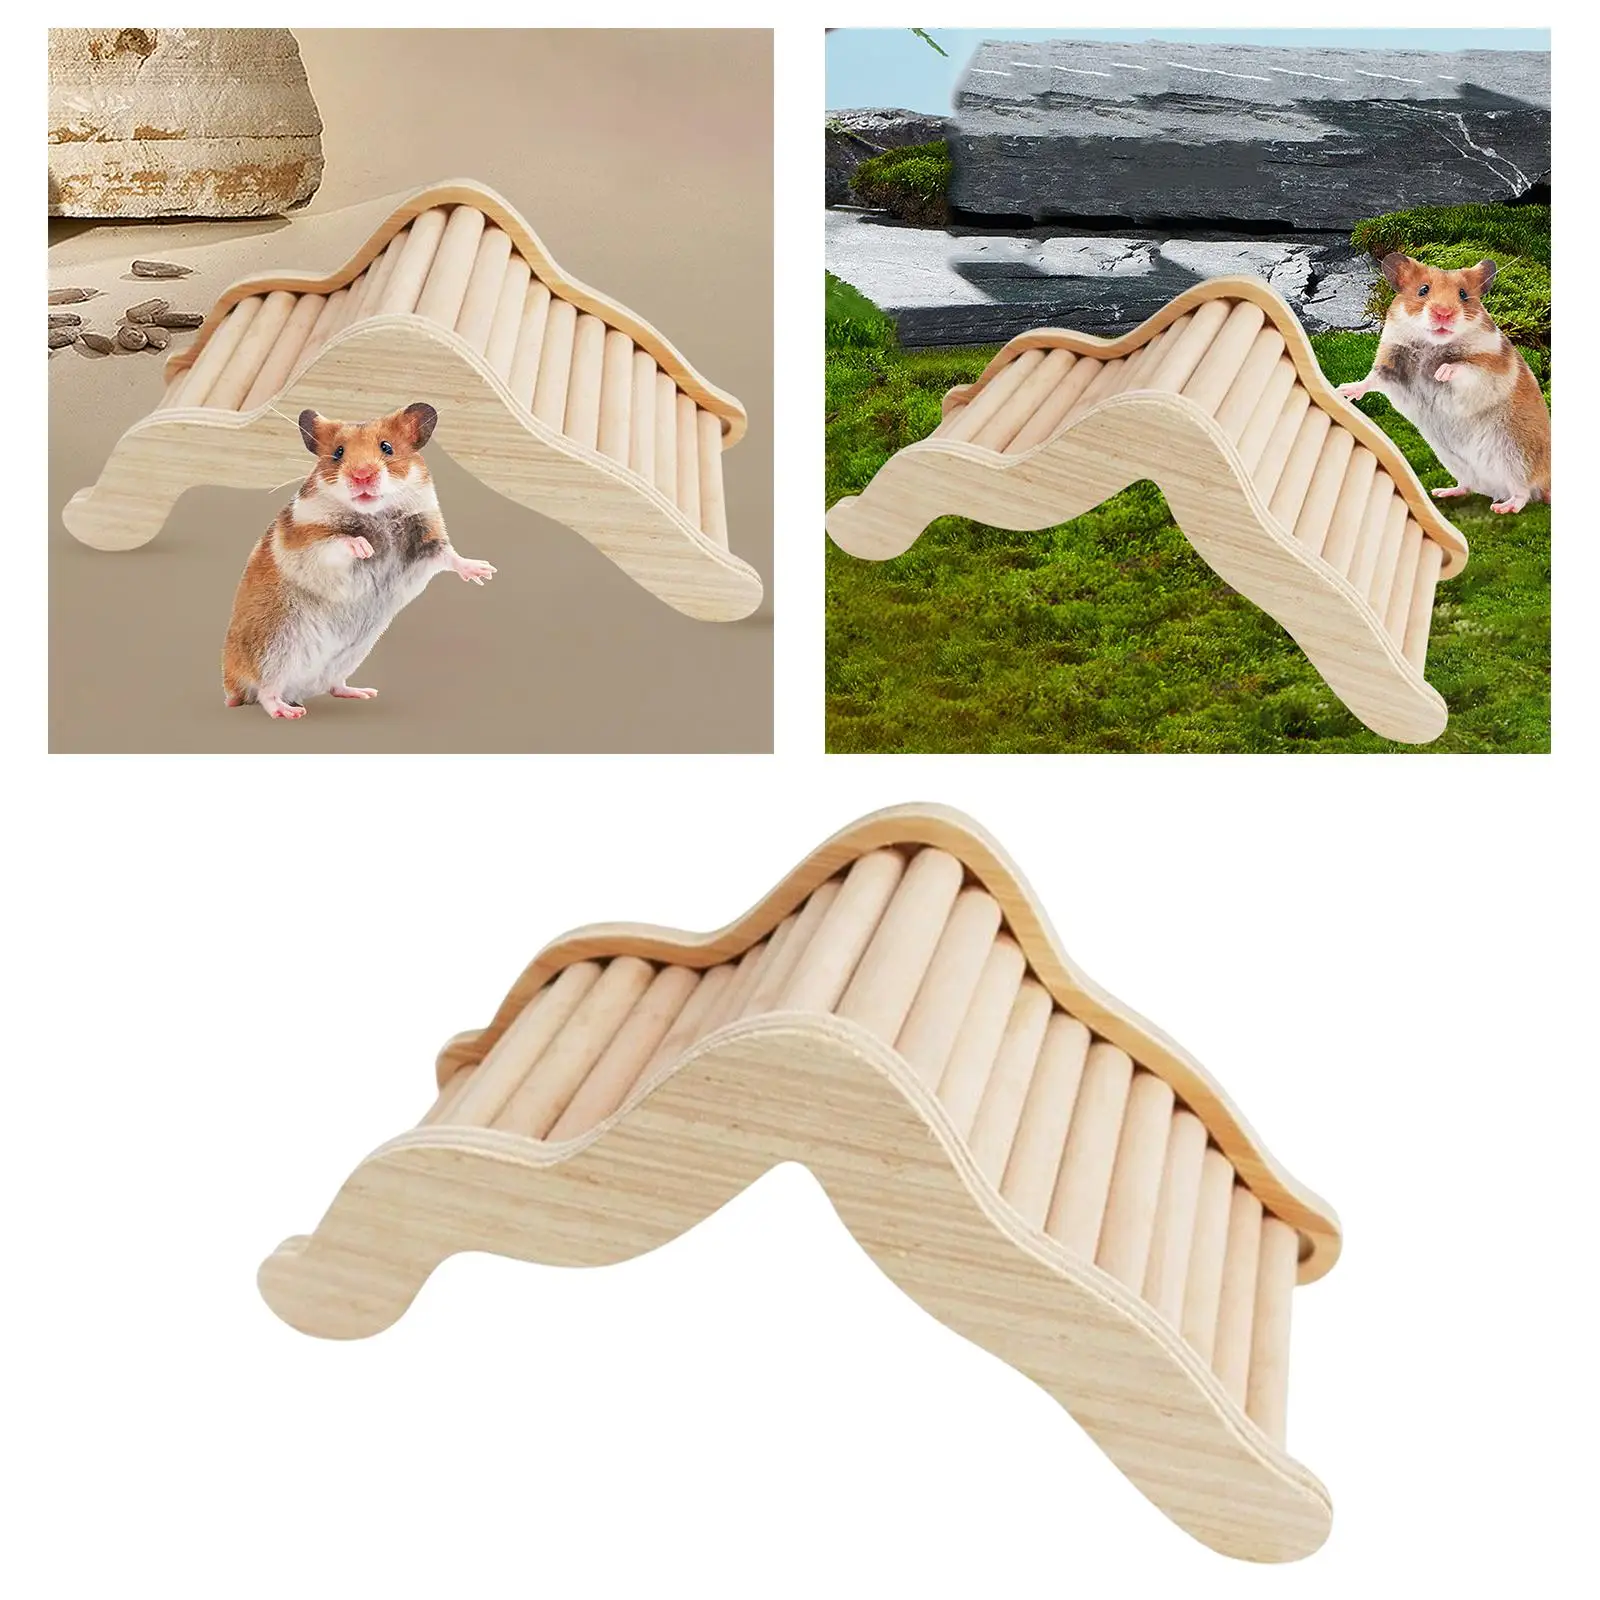 Hamster bridge Exercise Toy Decorative Gift Platform Climbing stairs Finches Parrots Pet Mice Activity